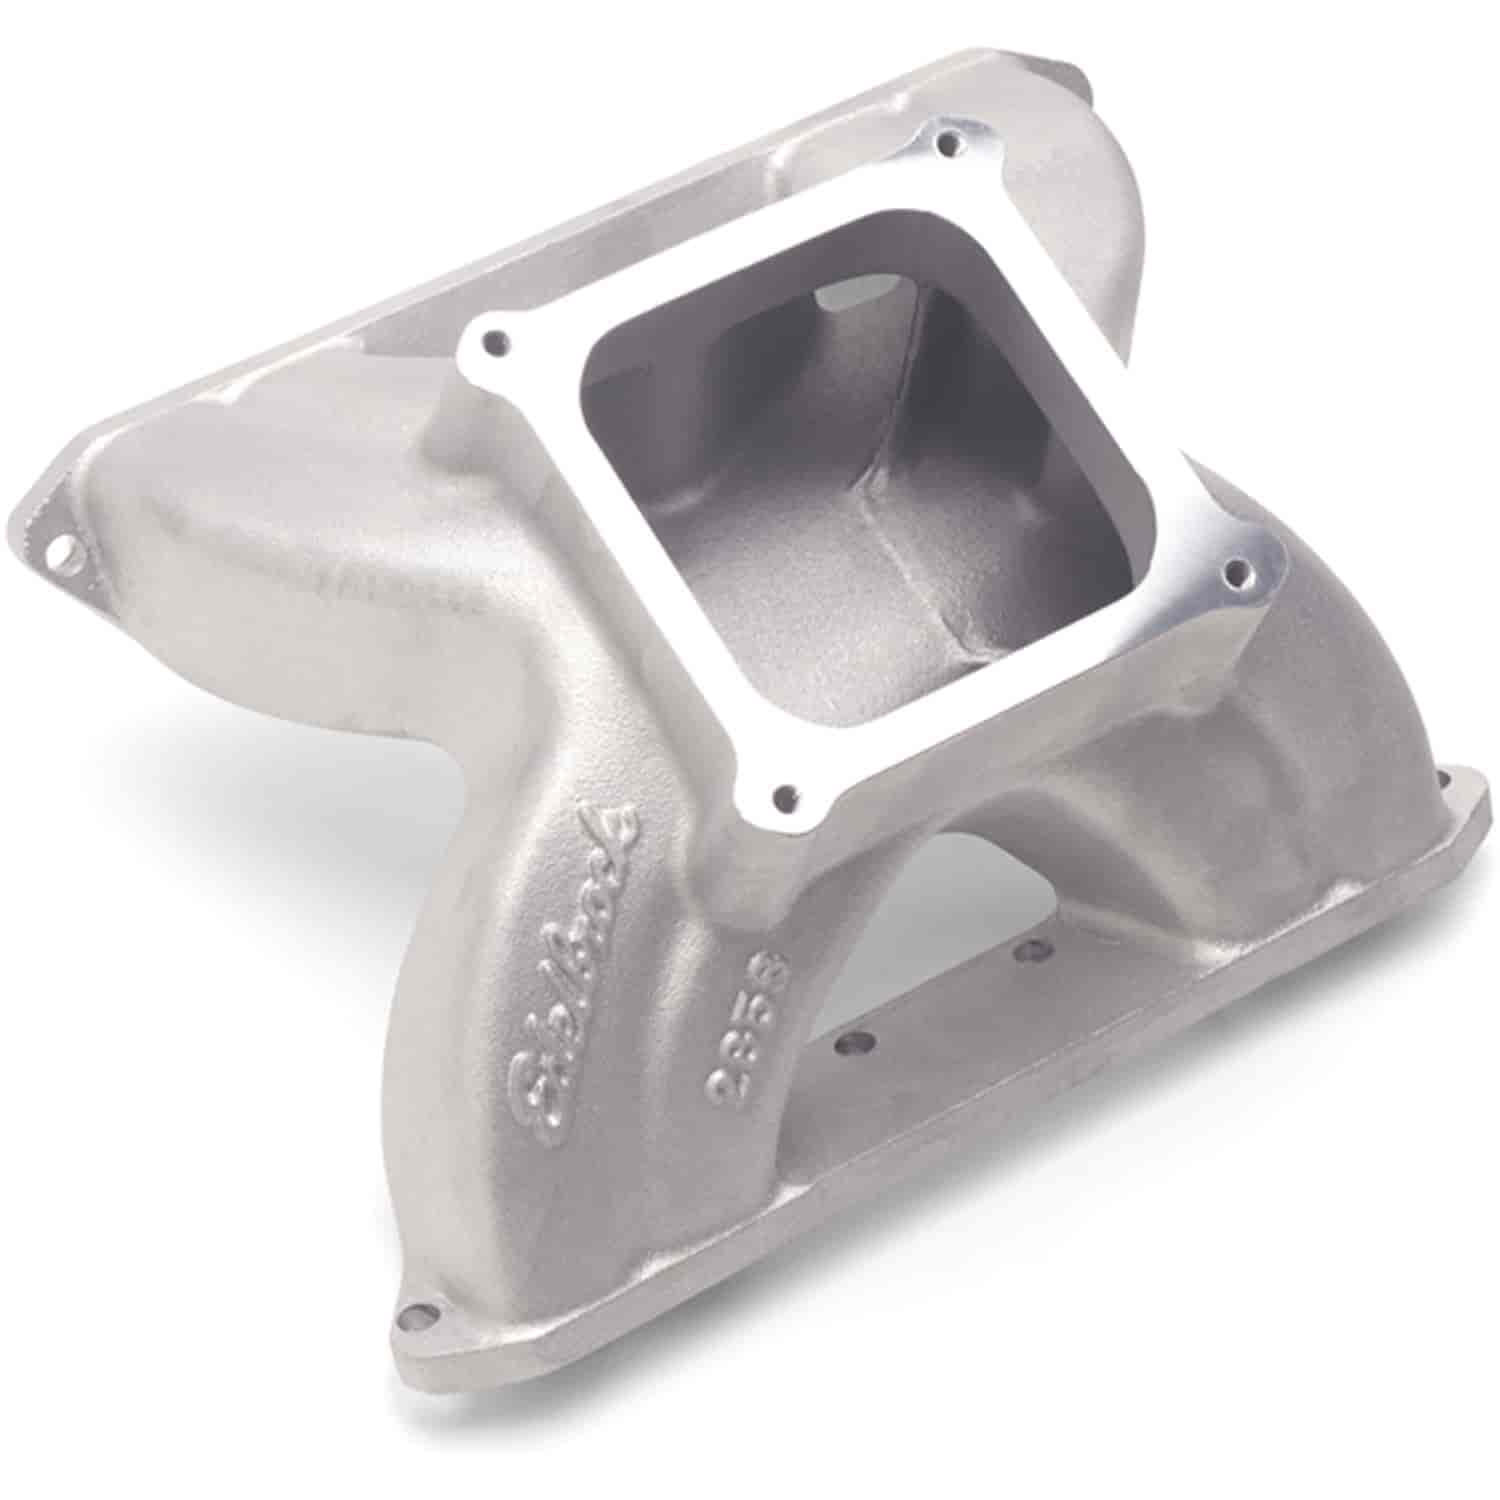 Victor Glidden 15°-18° Spider Intake Manifold for Small Block Chevy